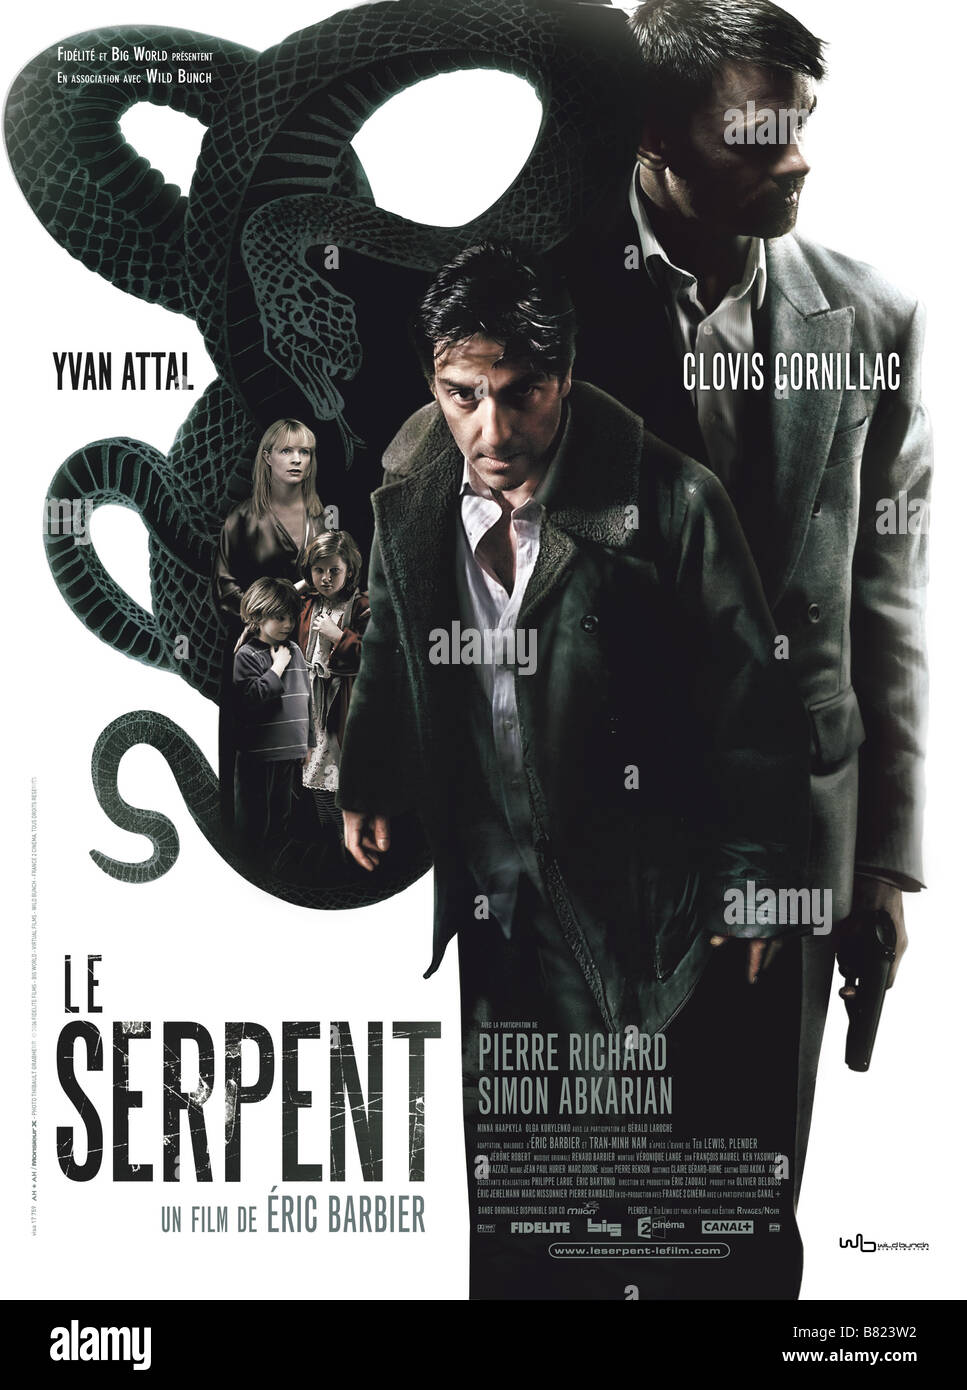 Le Serpent Le Serpent  Year: 2006 - France Affiche / Poster Yvan Attal, Clovis Cornillac  Director: Eric Barbier Stock Photo